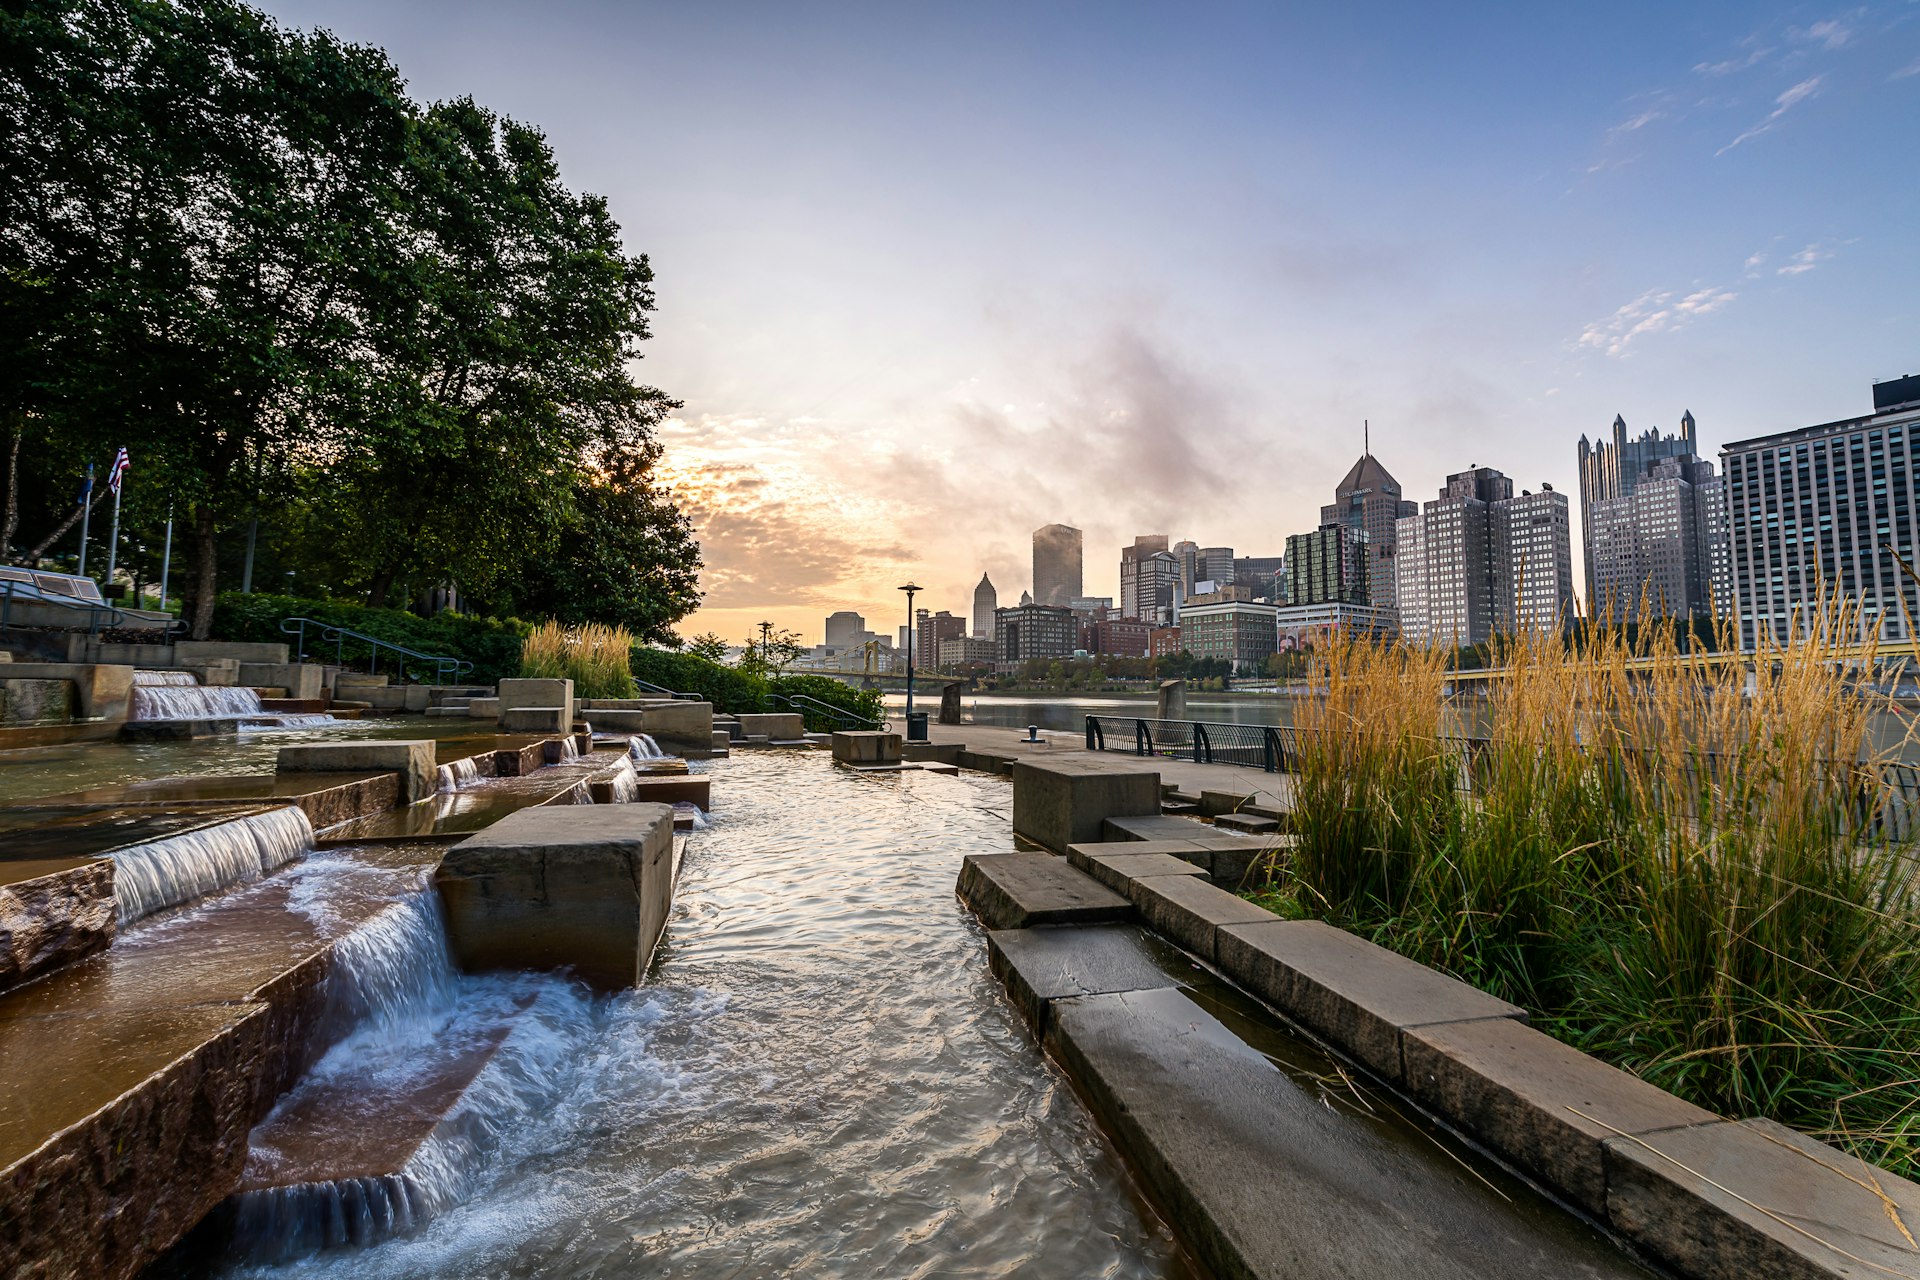 Early morning from the Allegheny Landing, an urban city park with water features build into the concrete